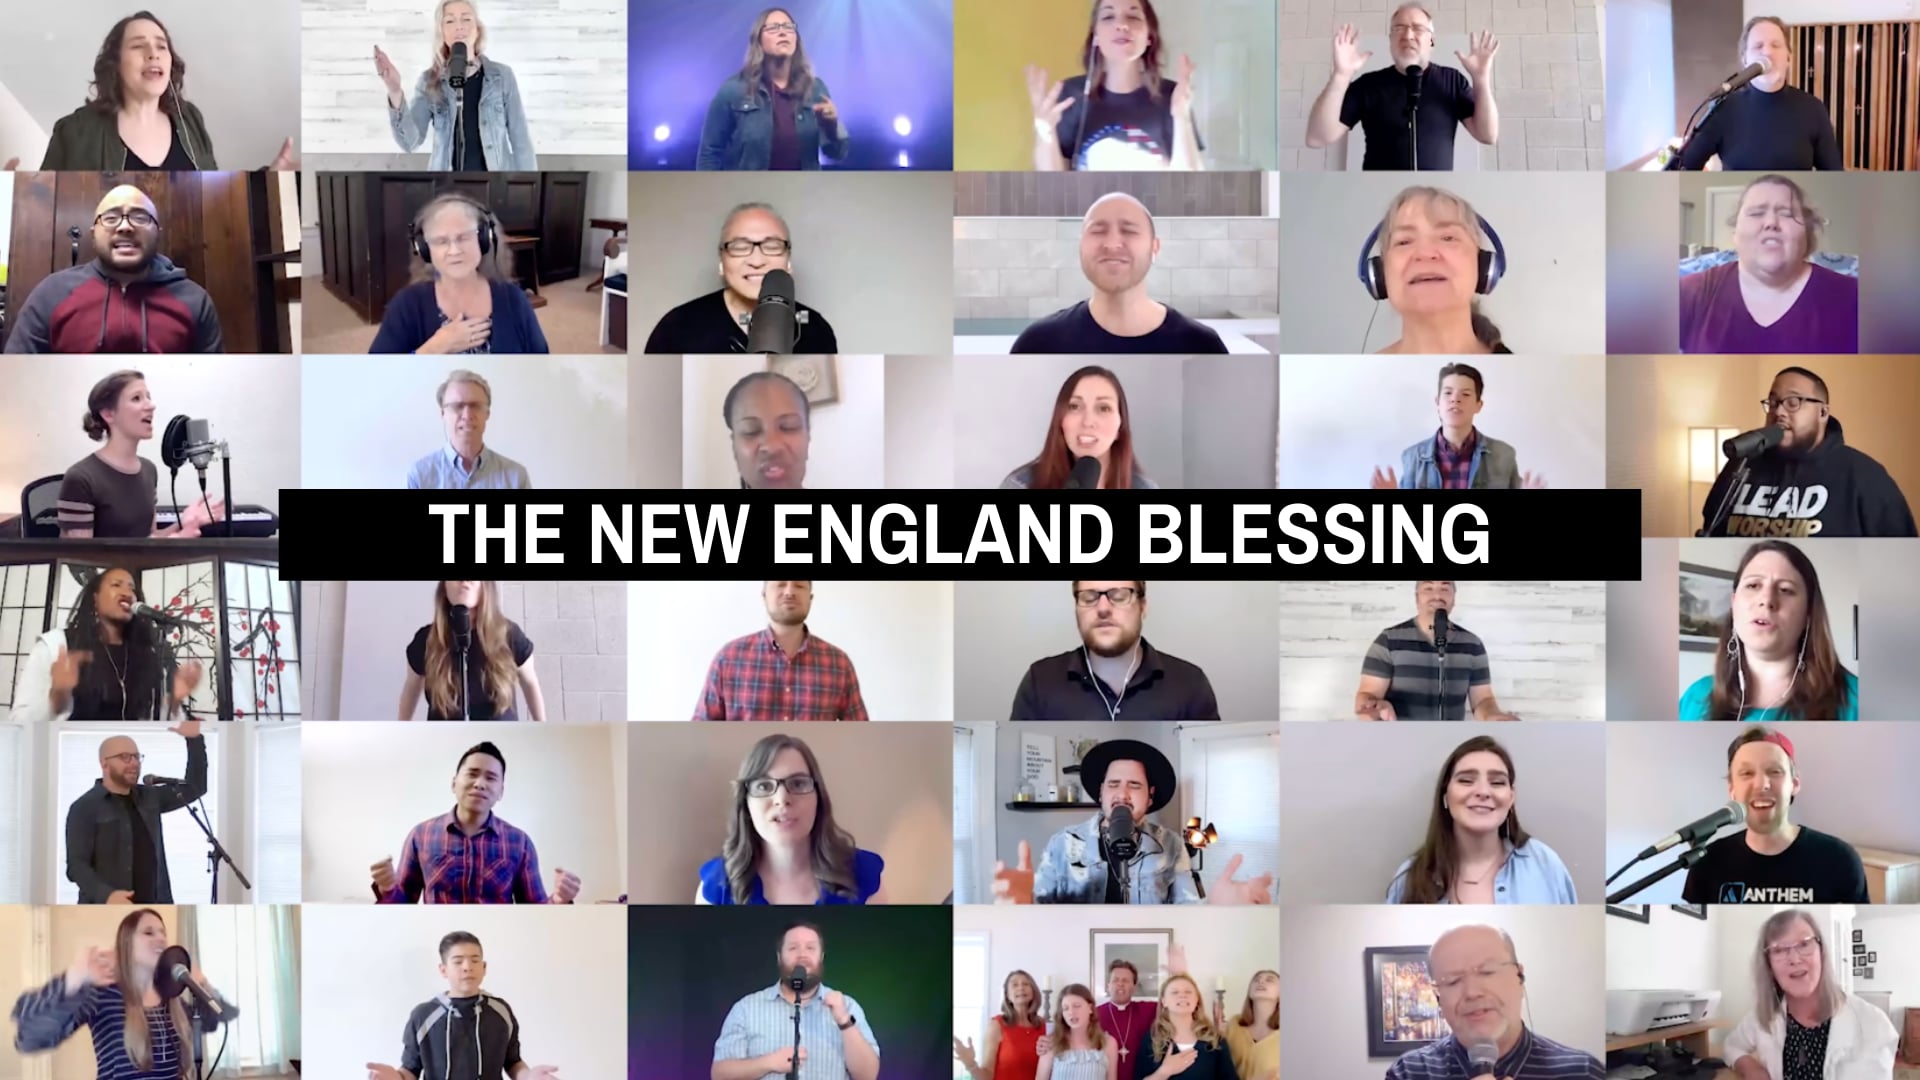 The New England Blessing - Churches sing "The Blessing" over New England